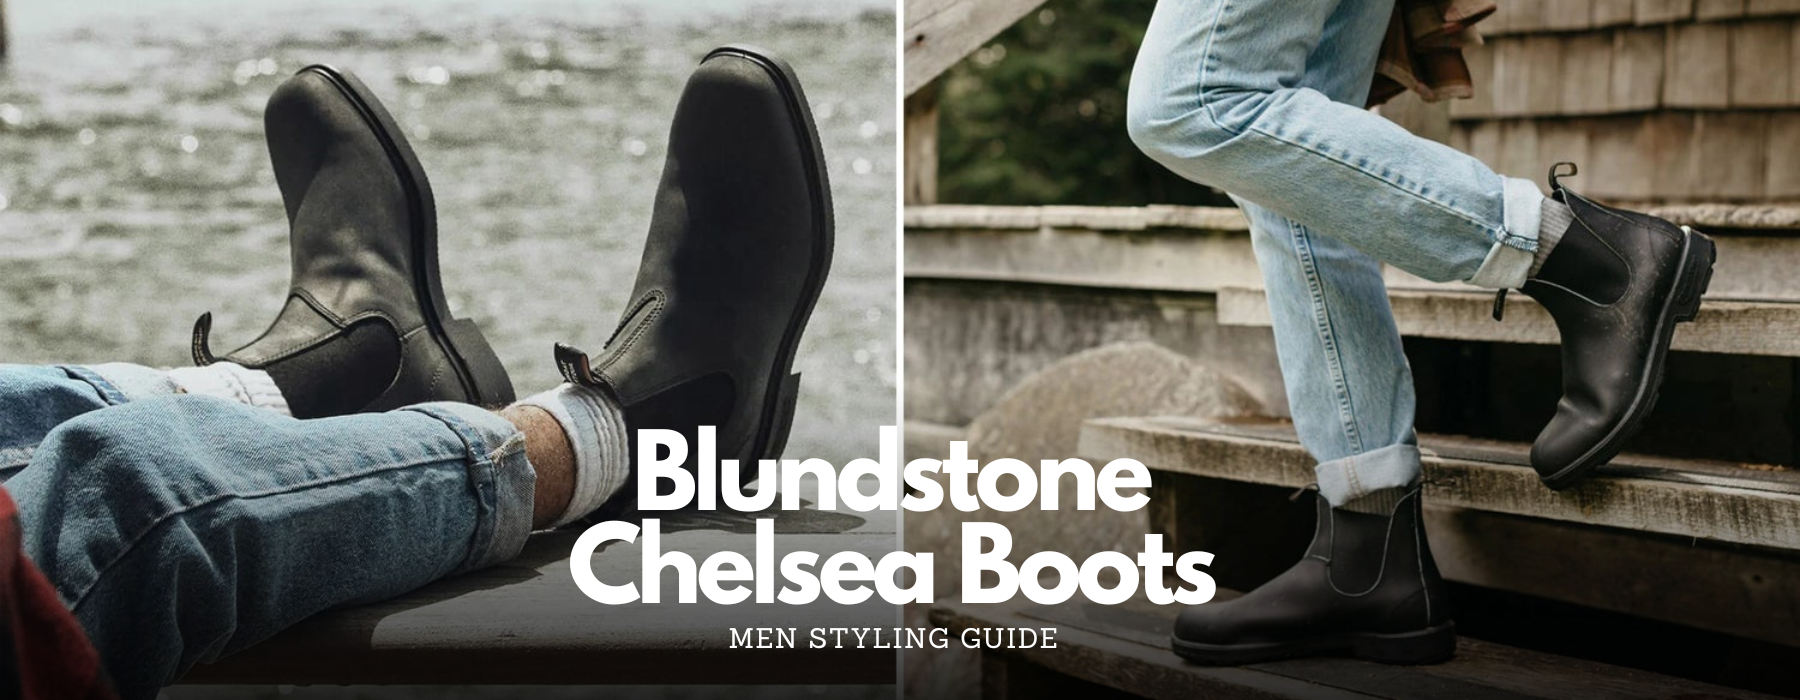 Men's Styling Guide for Blundstone Chelsea Boots - Upperclass Fashions 